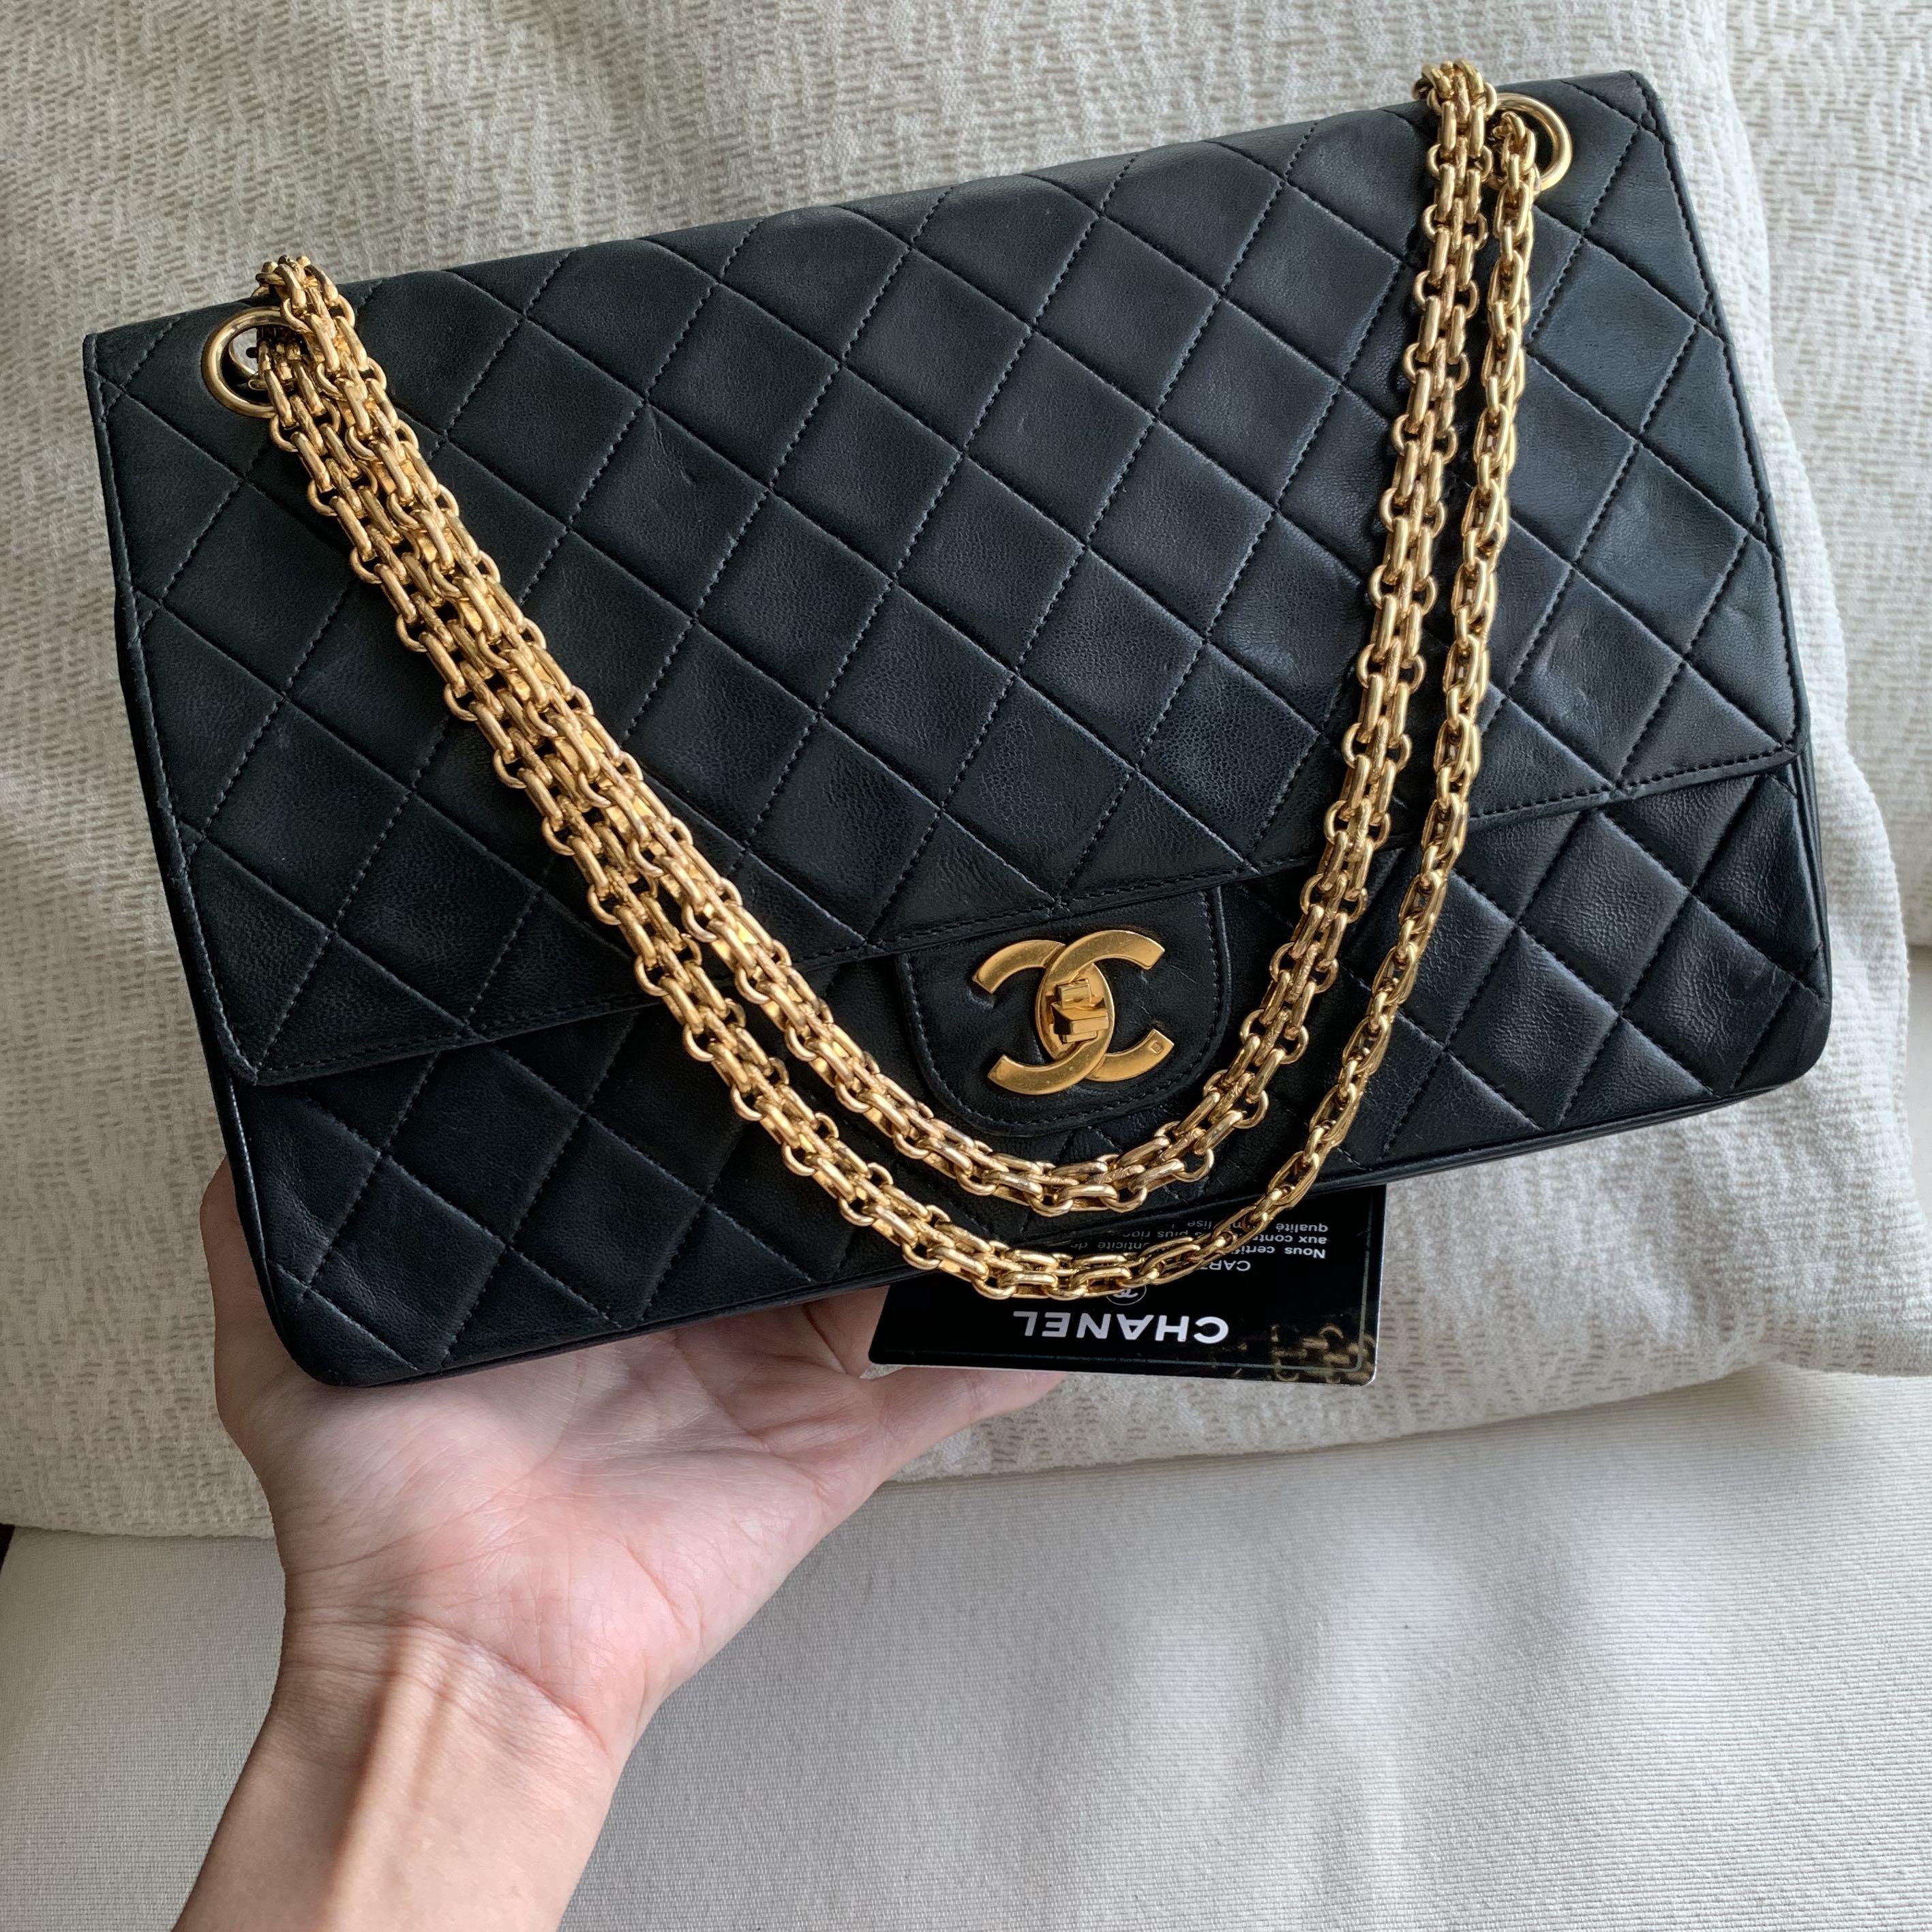 AUTHENTIC CHANEL 10.5" Classic Flap Bag with Mademoiselle Reissue Chain